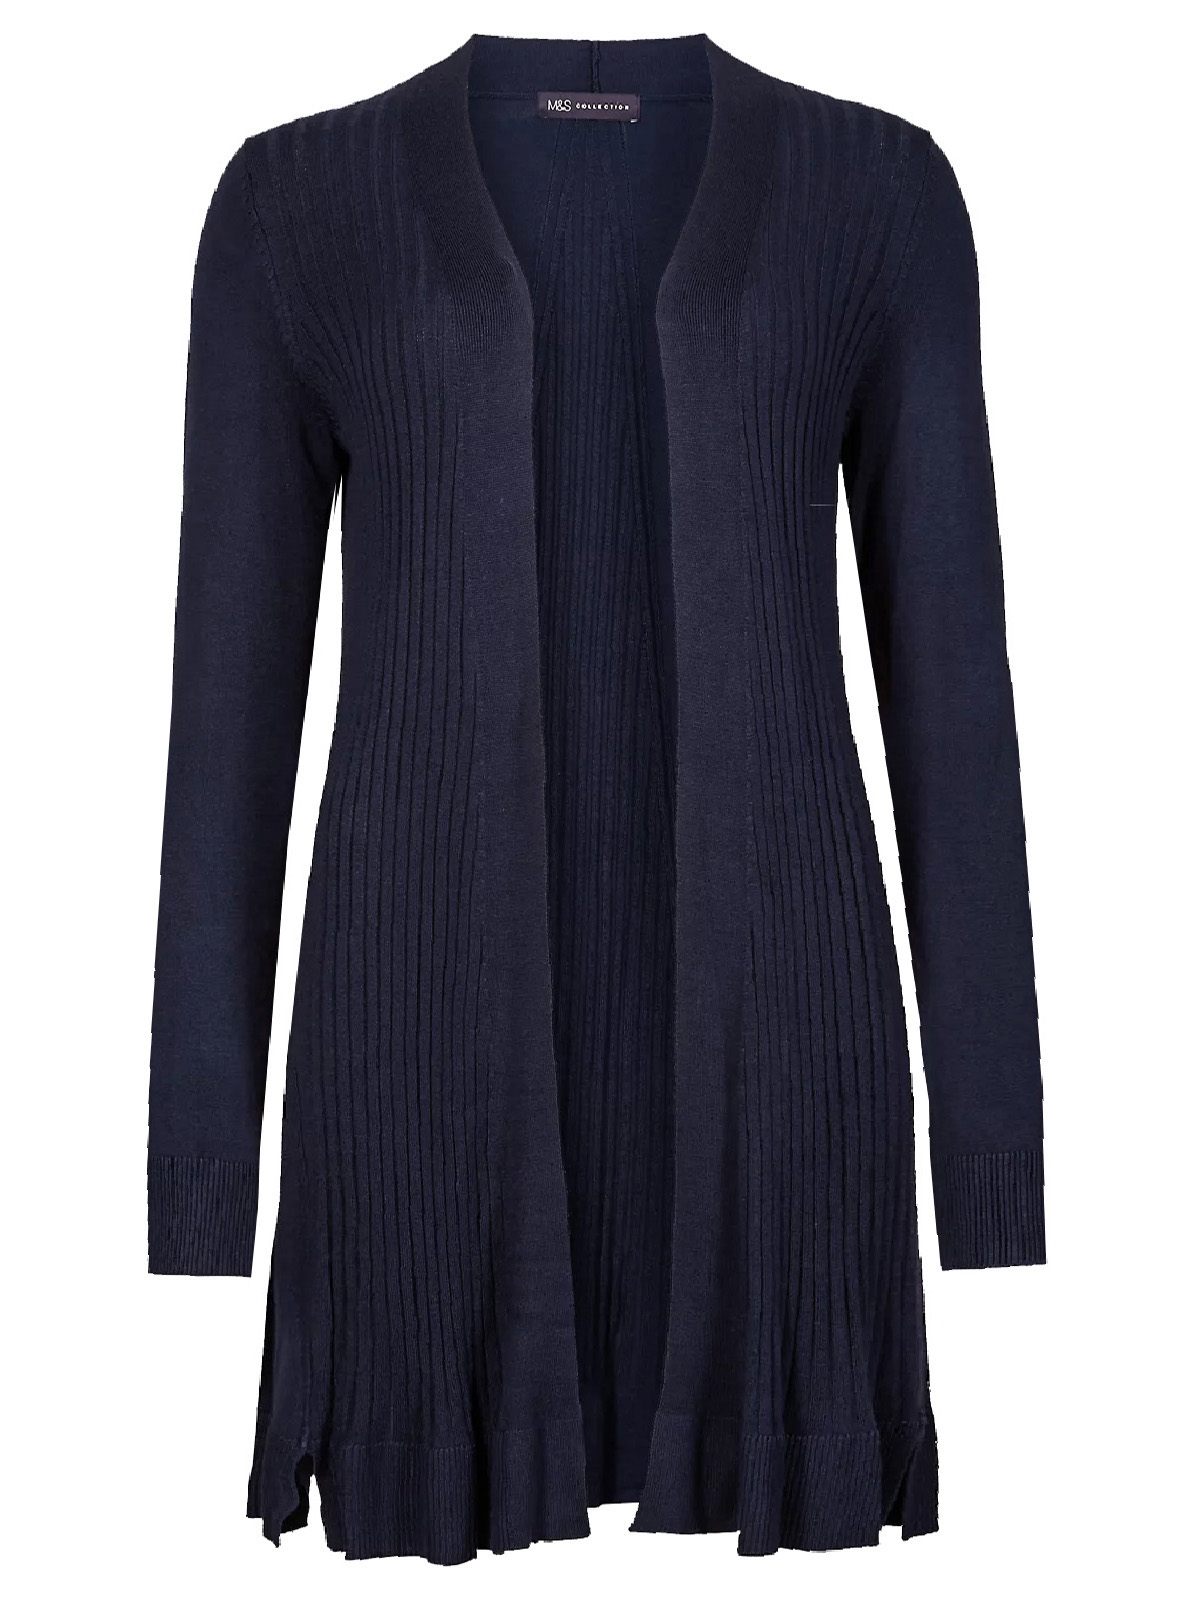 Marks and Spencer - - M&5 NAVY Ribbed Longline Cardigan - Size S to XL